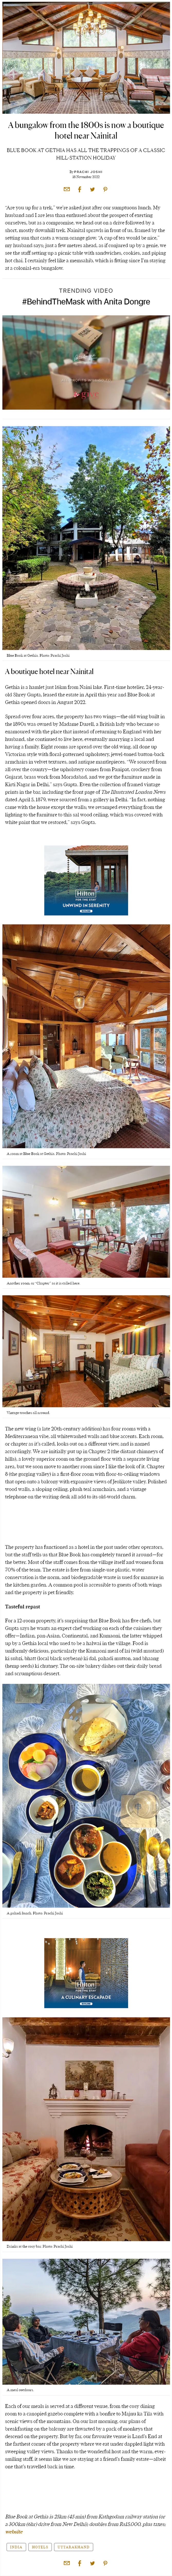 A bungalow from the 1800s is now a boutique hotel near Nainital